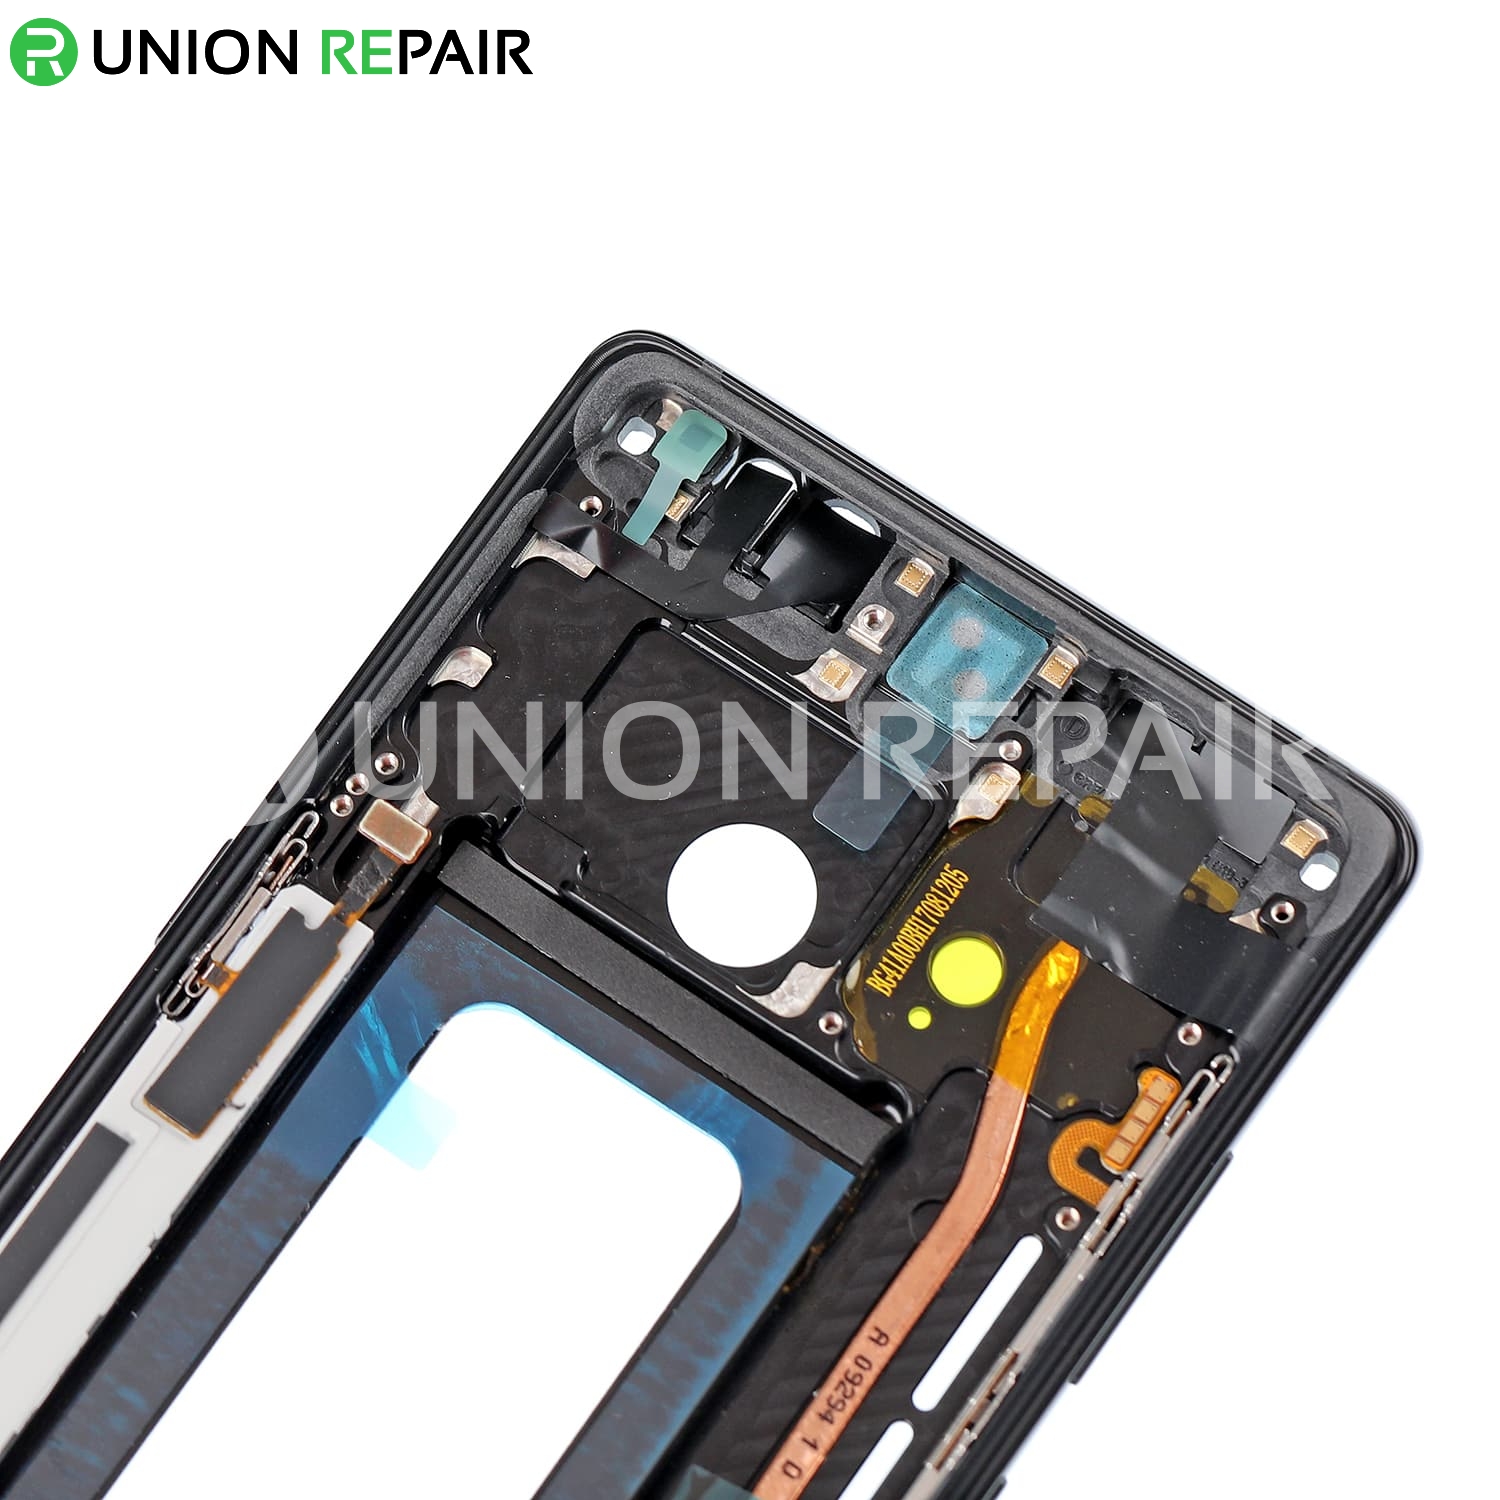 Replacement for Samsung Galaxy Note 8 SM-N950 Rear Housing Frame - Black